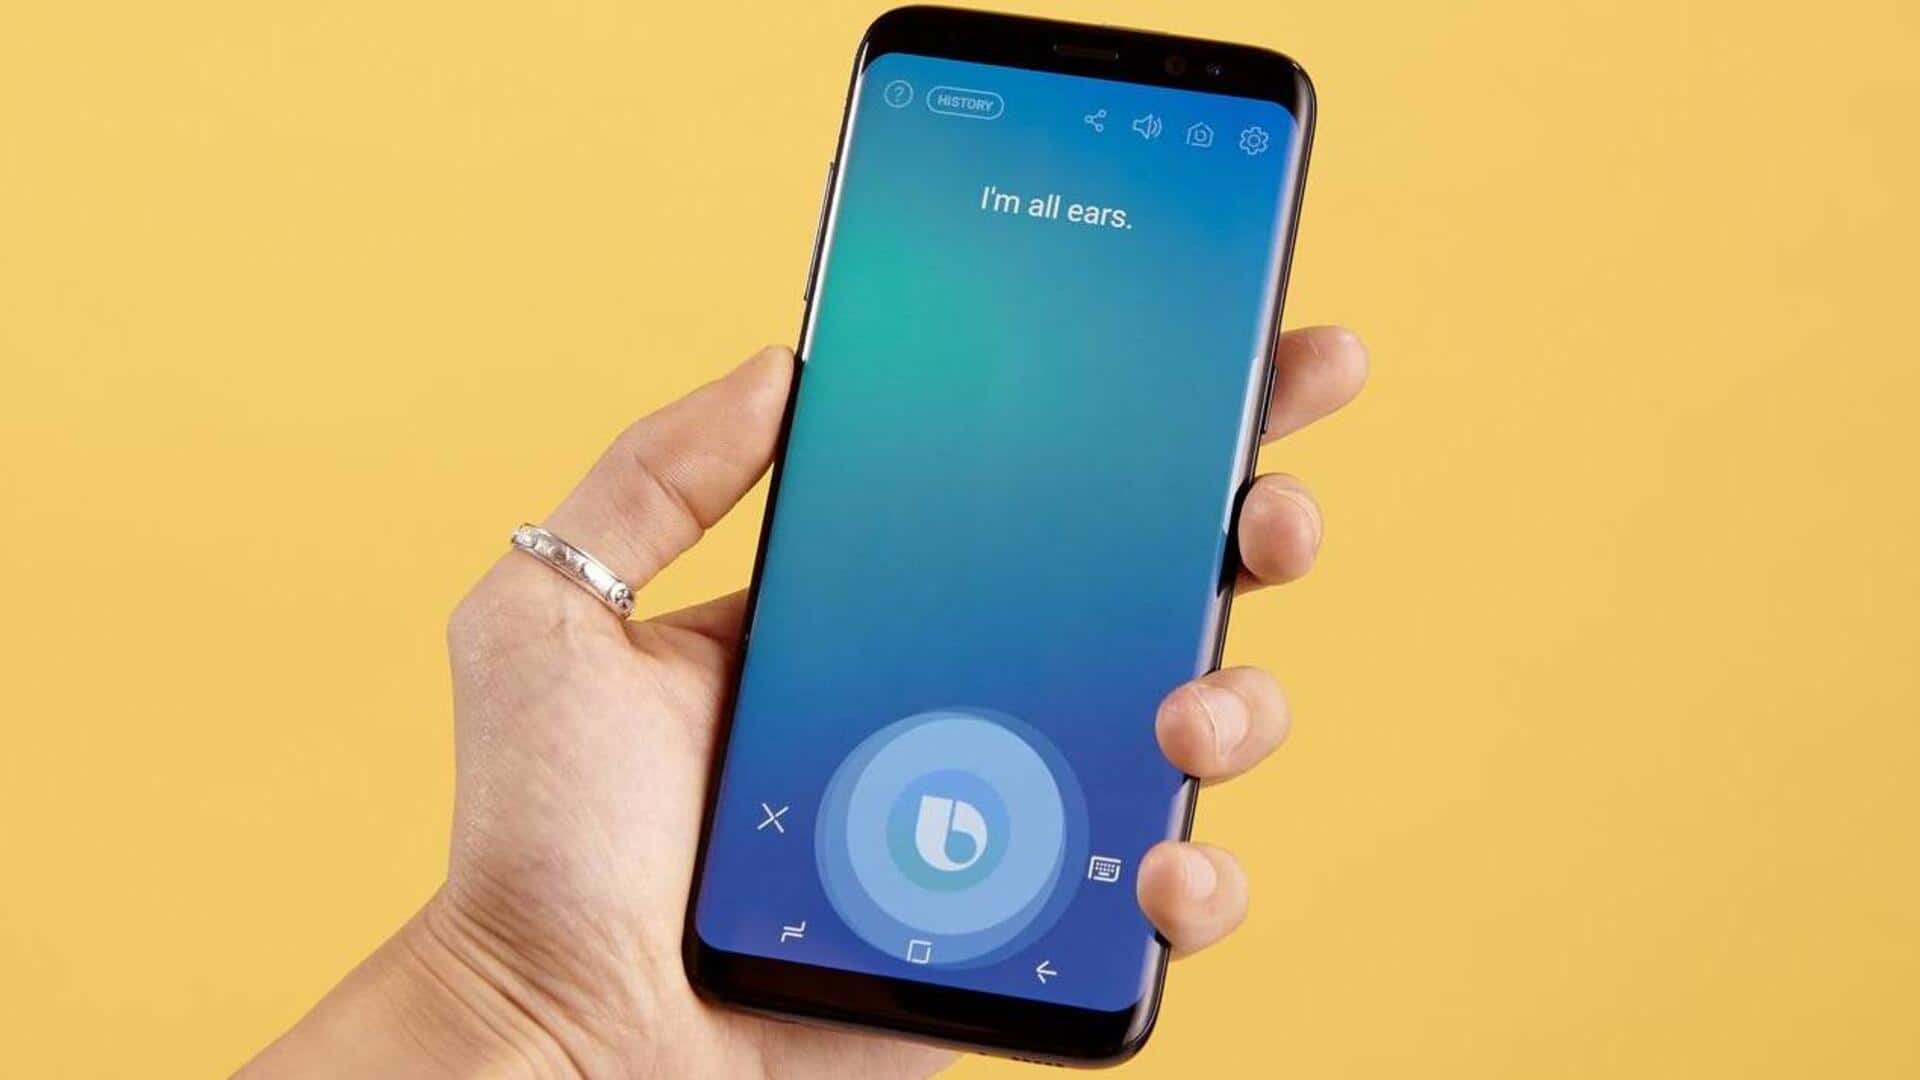 Samsung Bixby will now provide cricket scores in India